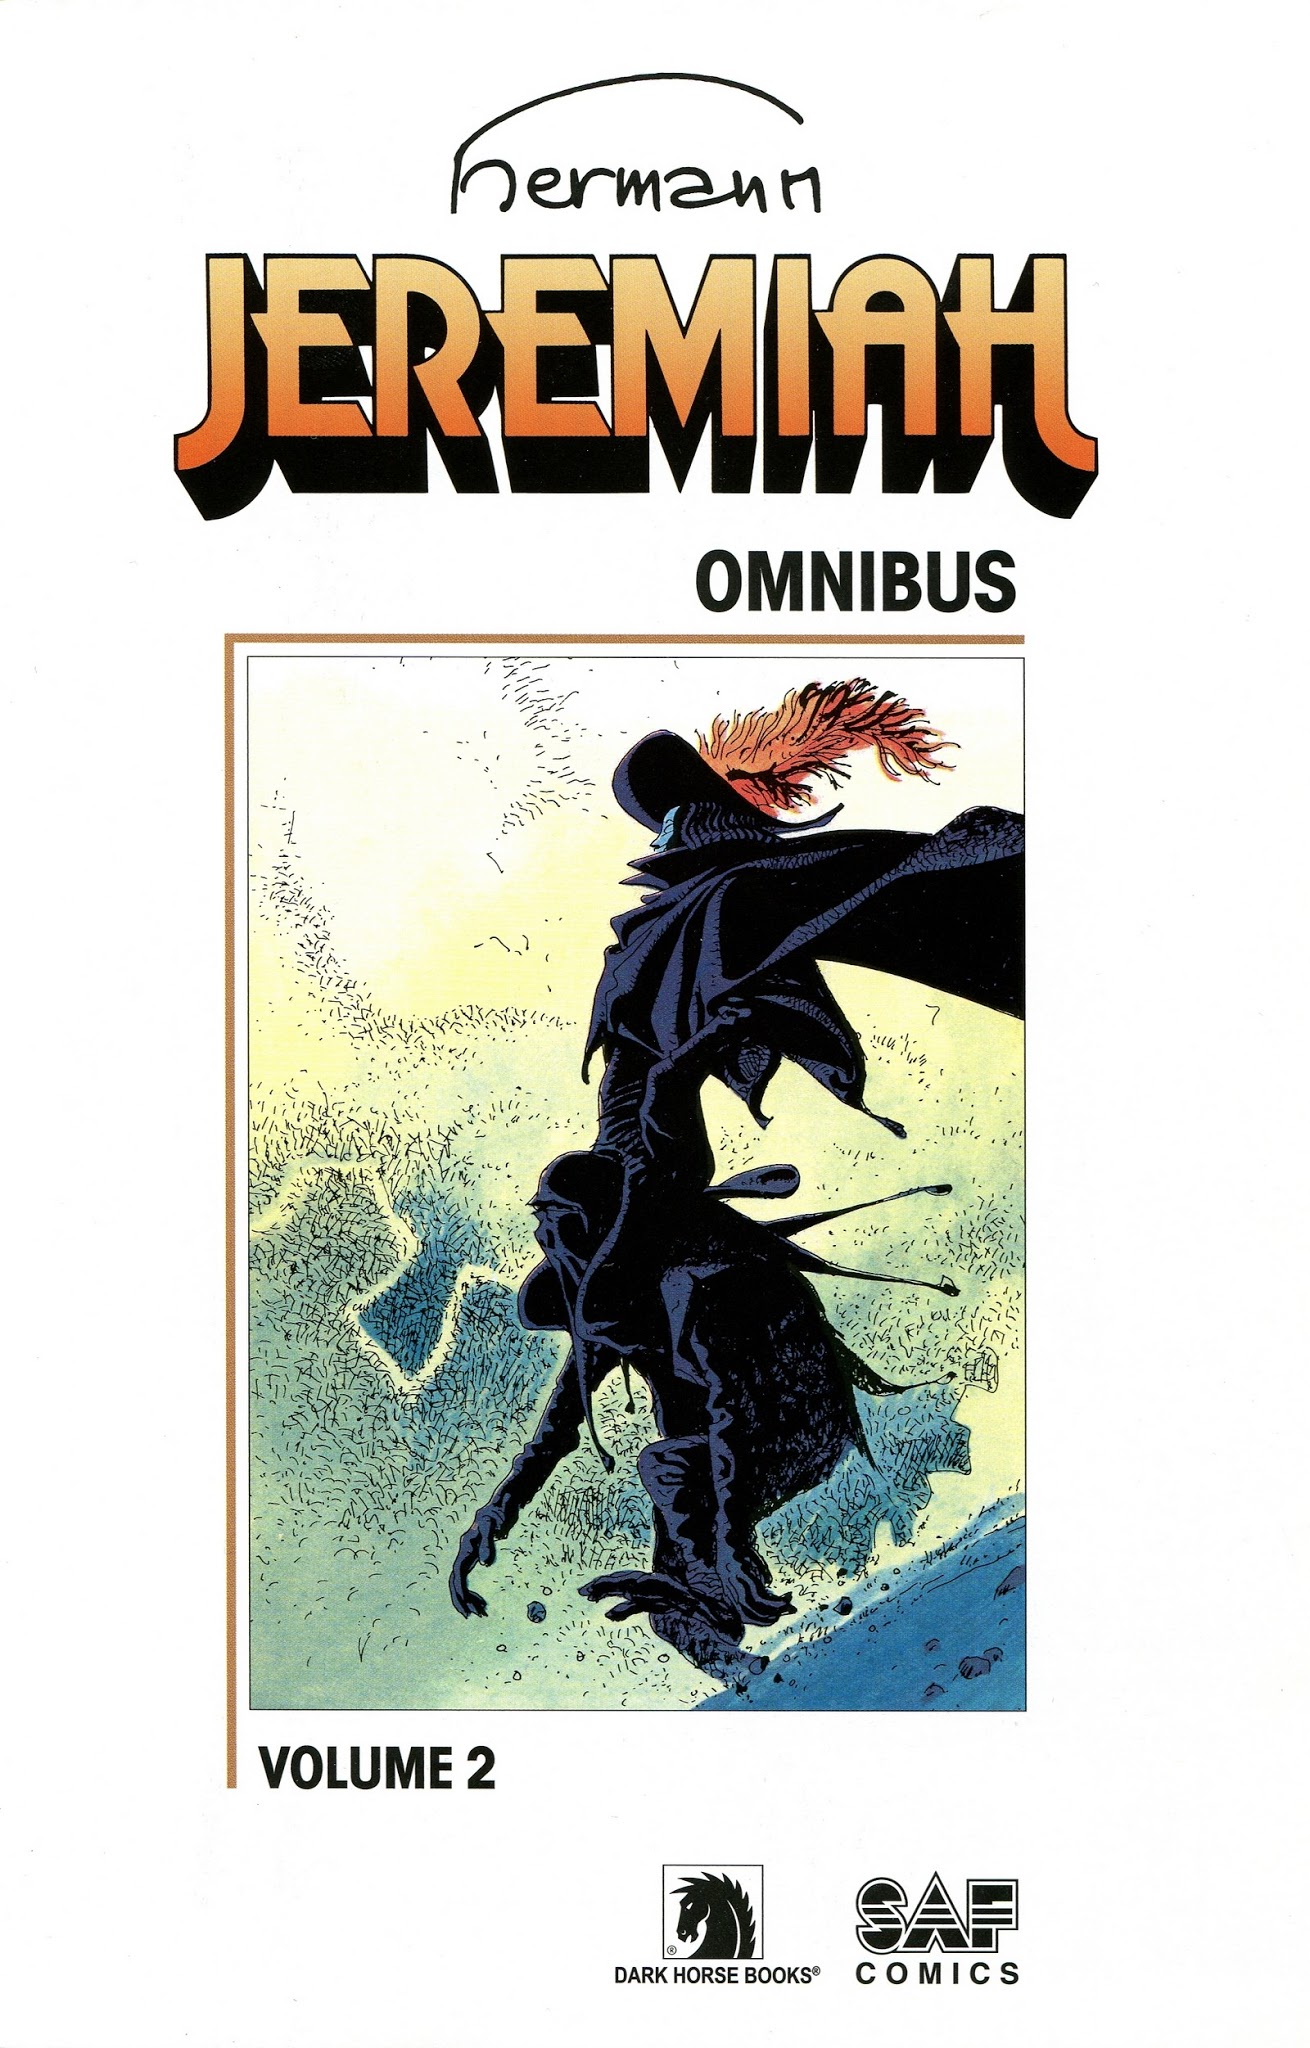 Read online Jeremiah by Hermann comic -  Issue # TPB 2 - 2